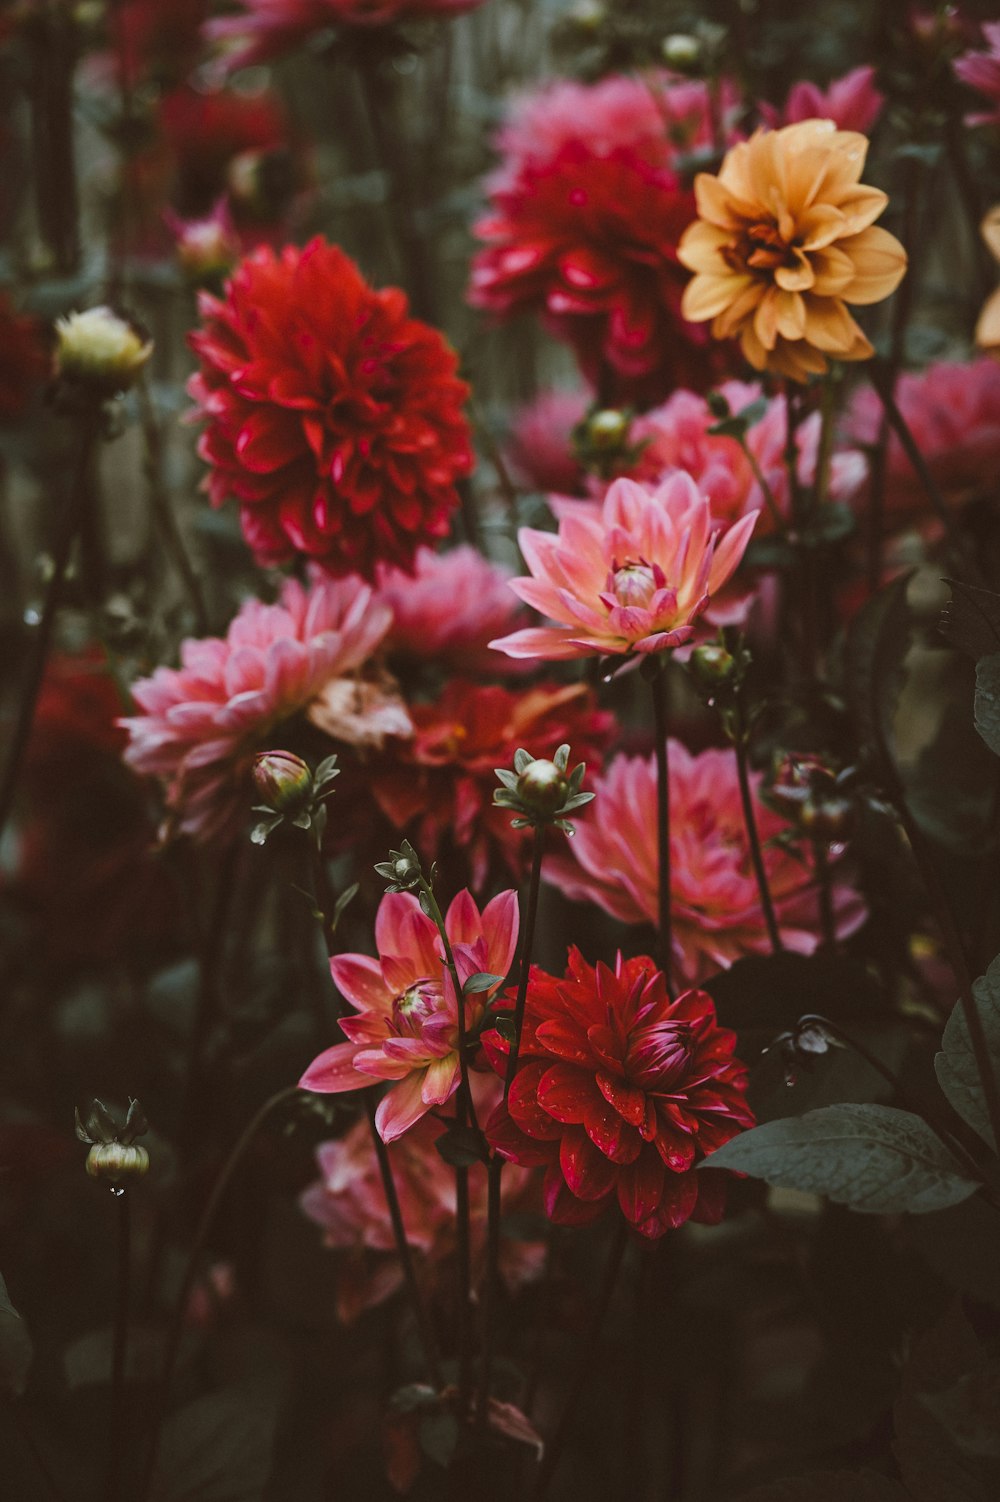 blooming red and yellow petaled flowers